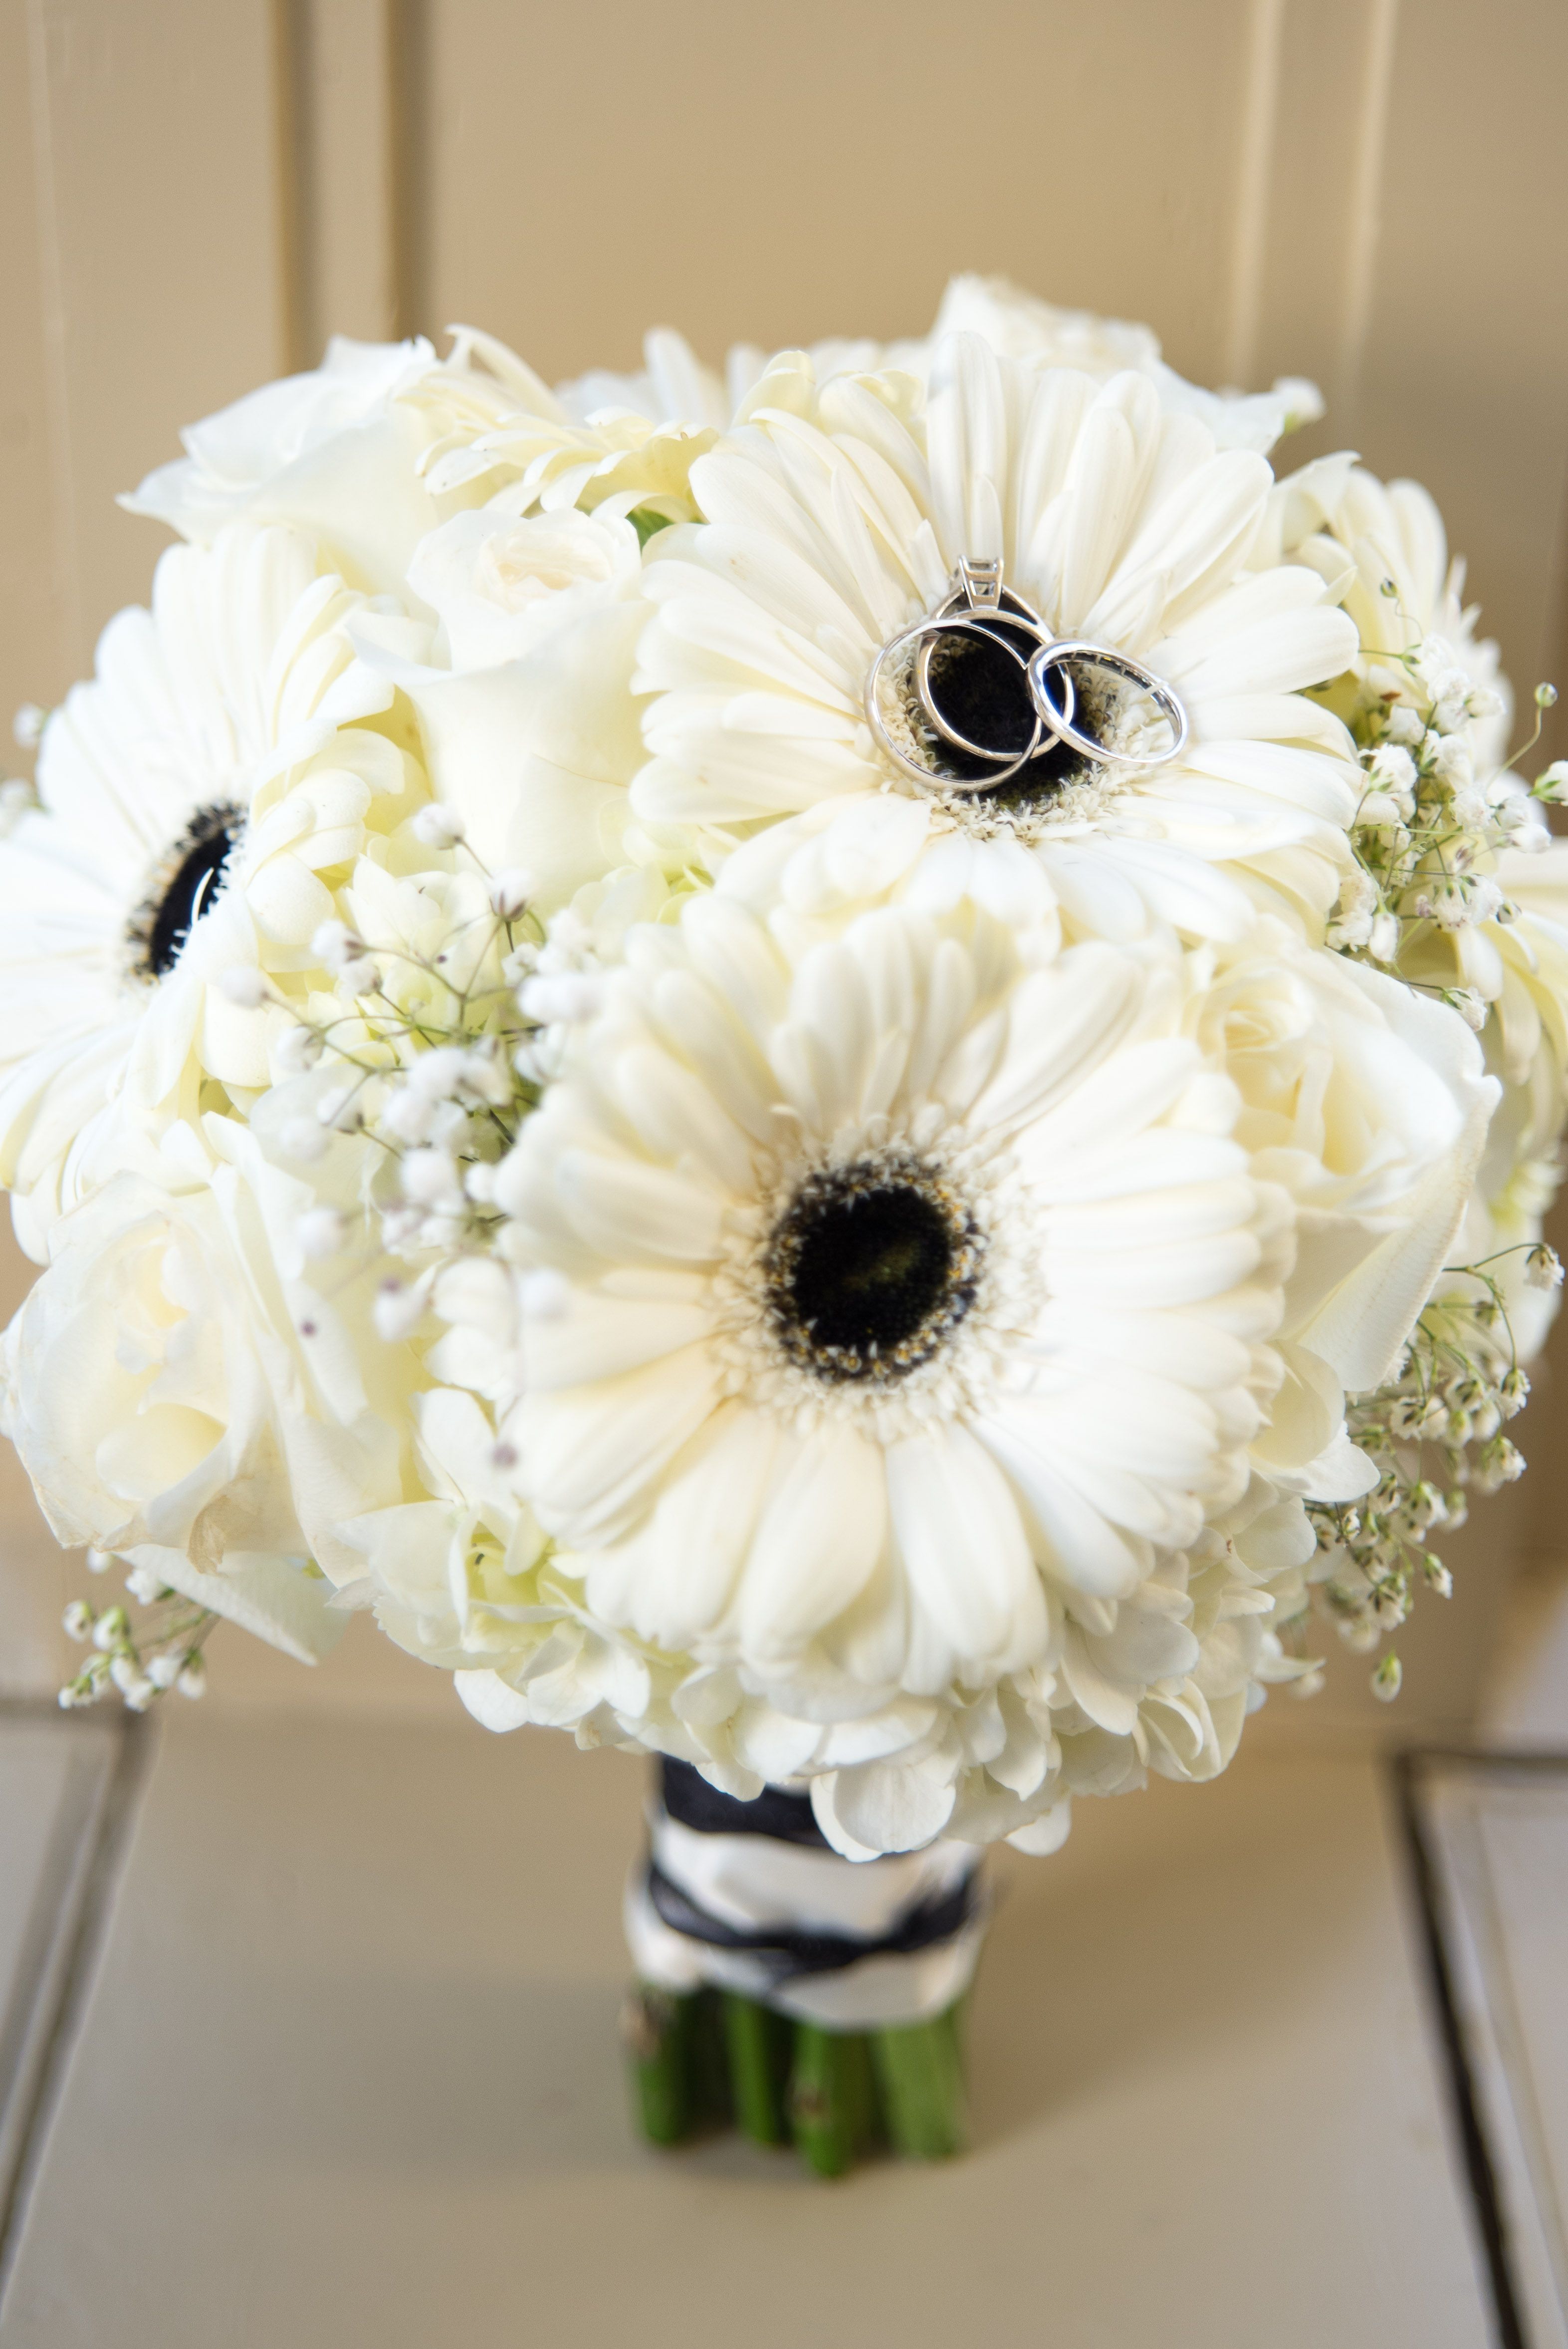 Black and white Gerbera daisy bouquet by Flowers Make Scents ...